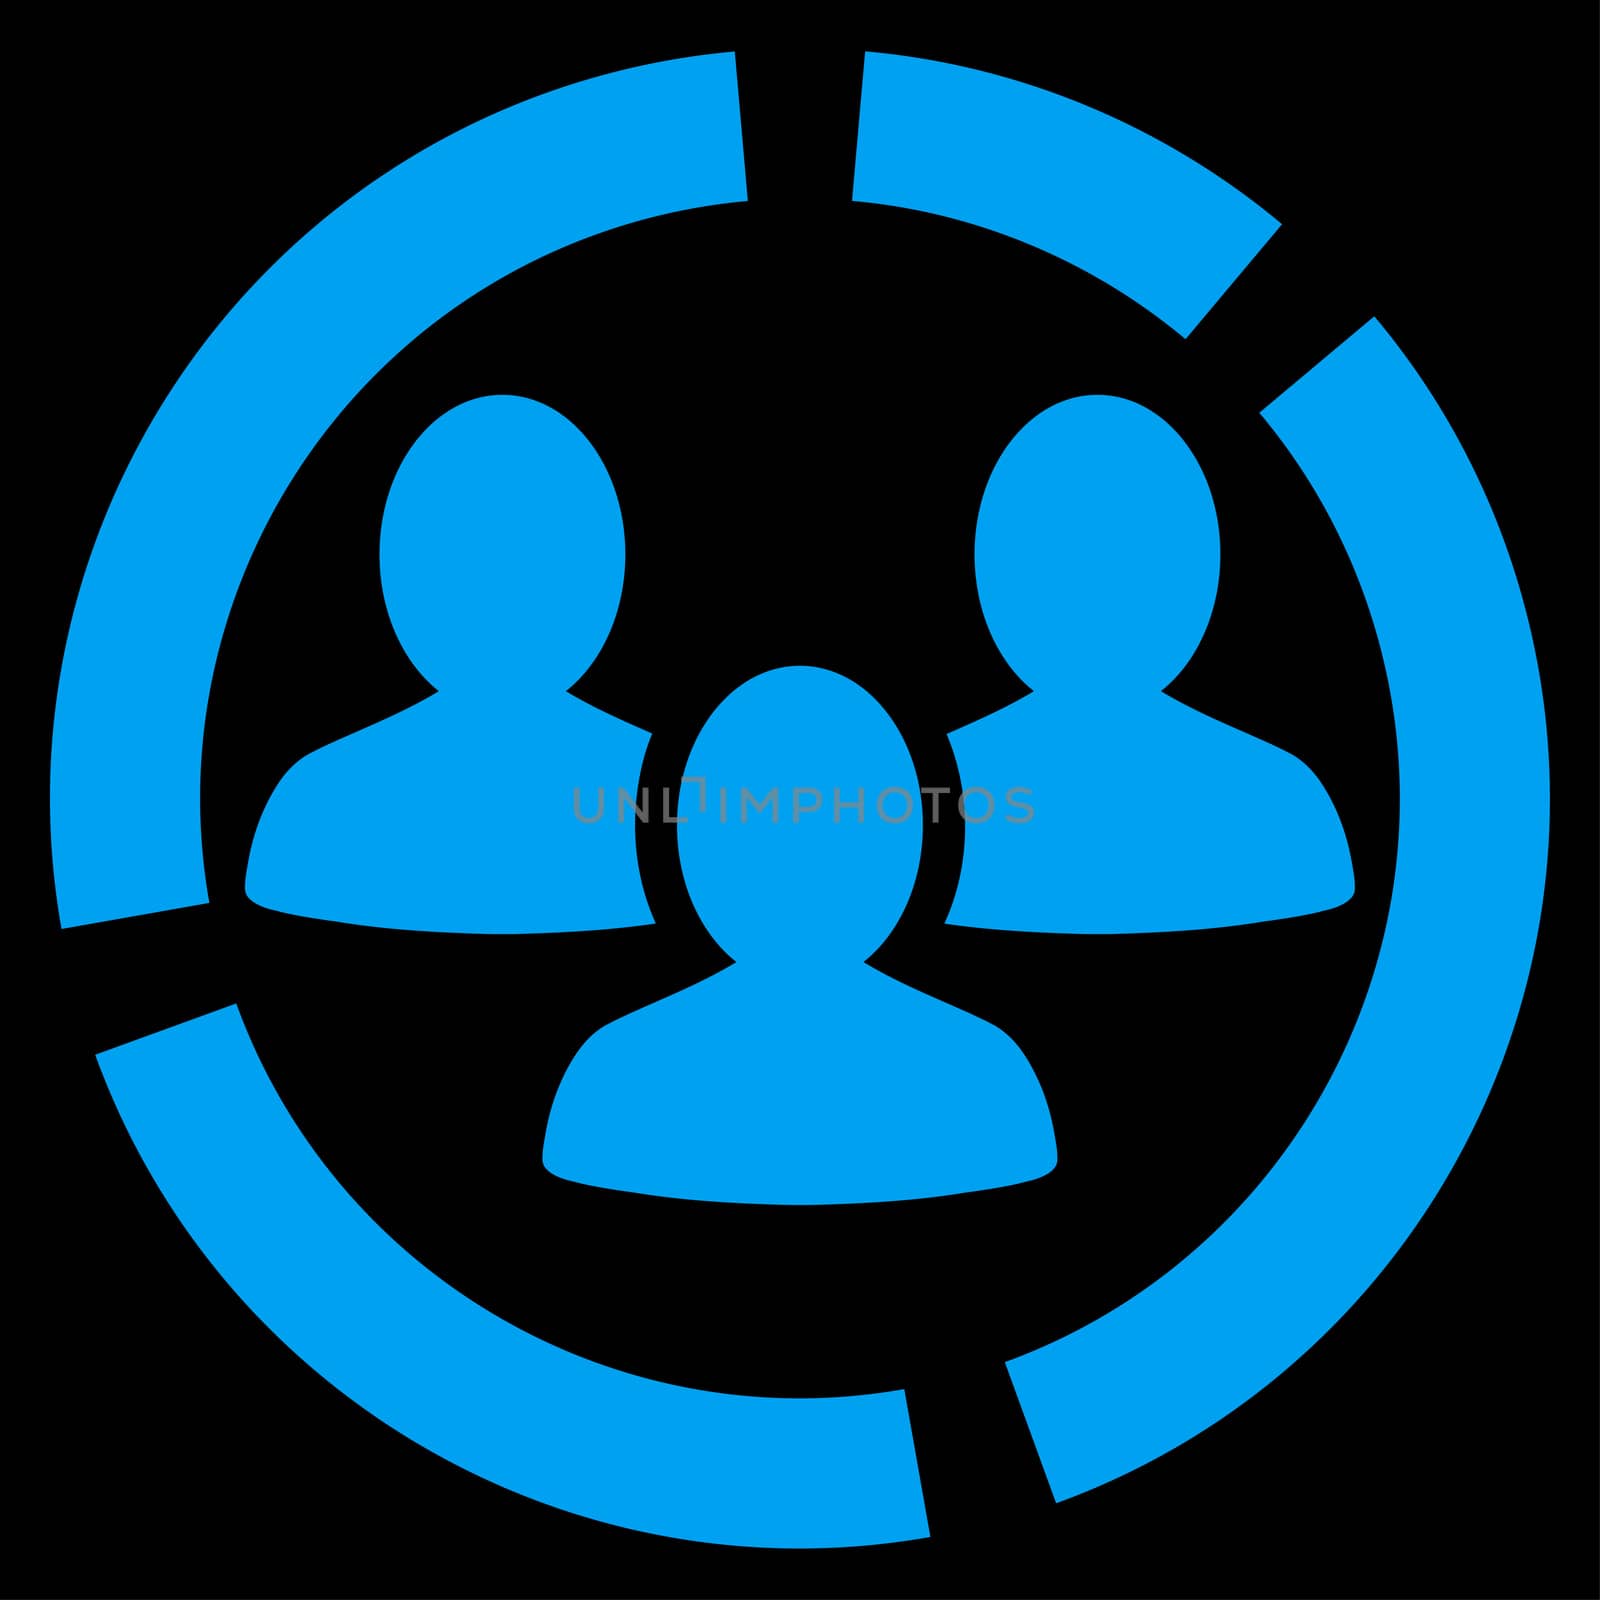 Demography diagram icon. Glyph style is flat symbol, blue color, rounded angles, black background.